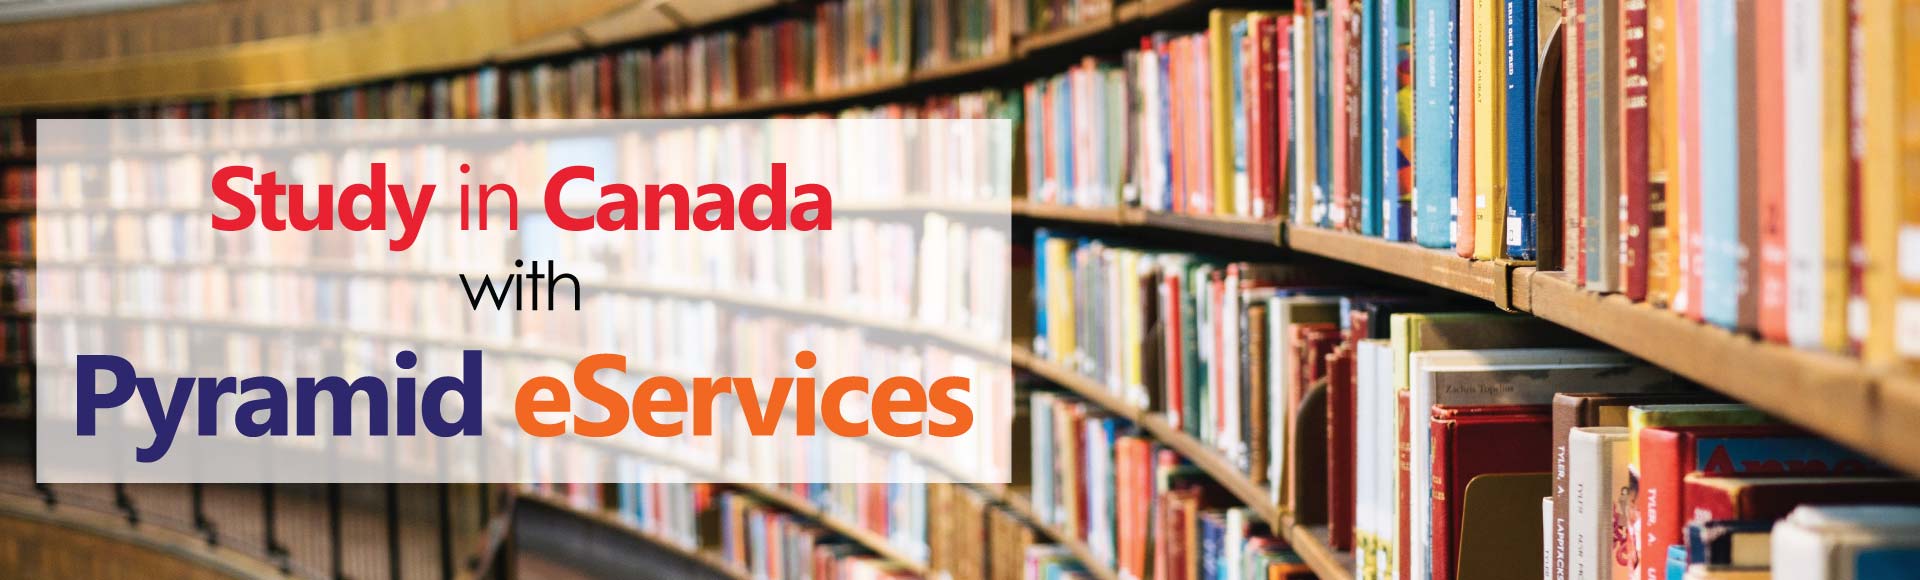 Study in Canada with the help or Pyramid eServices